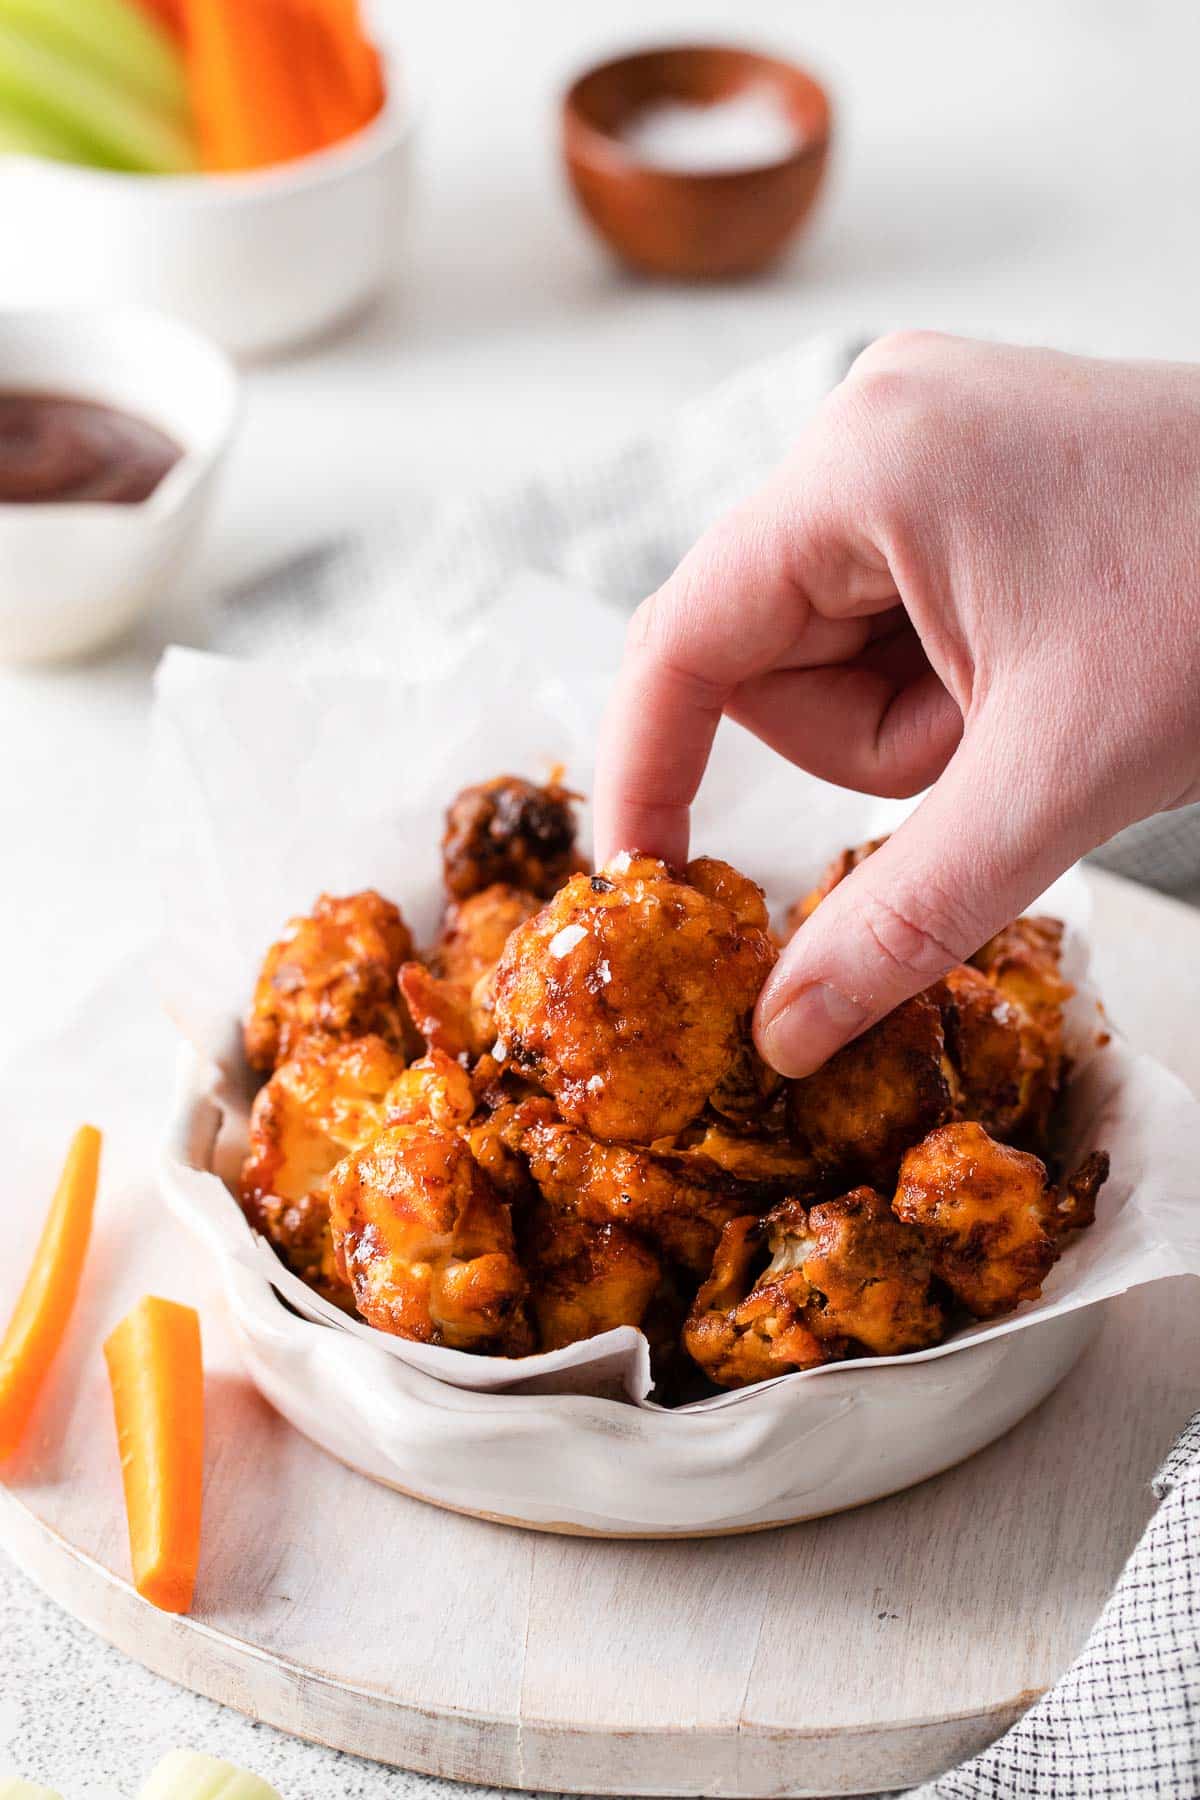 A female hand holding a cauliflower wing coated in BBQ sauce next to a white bowl filled with more wings